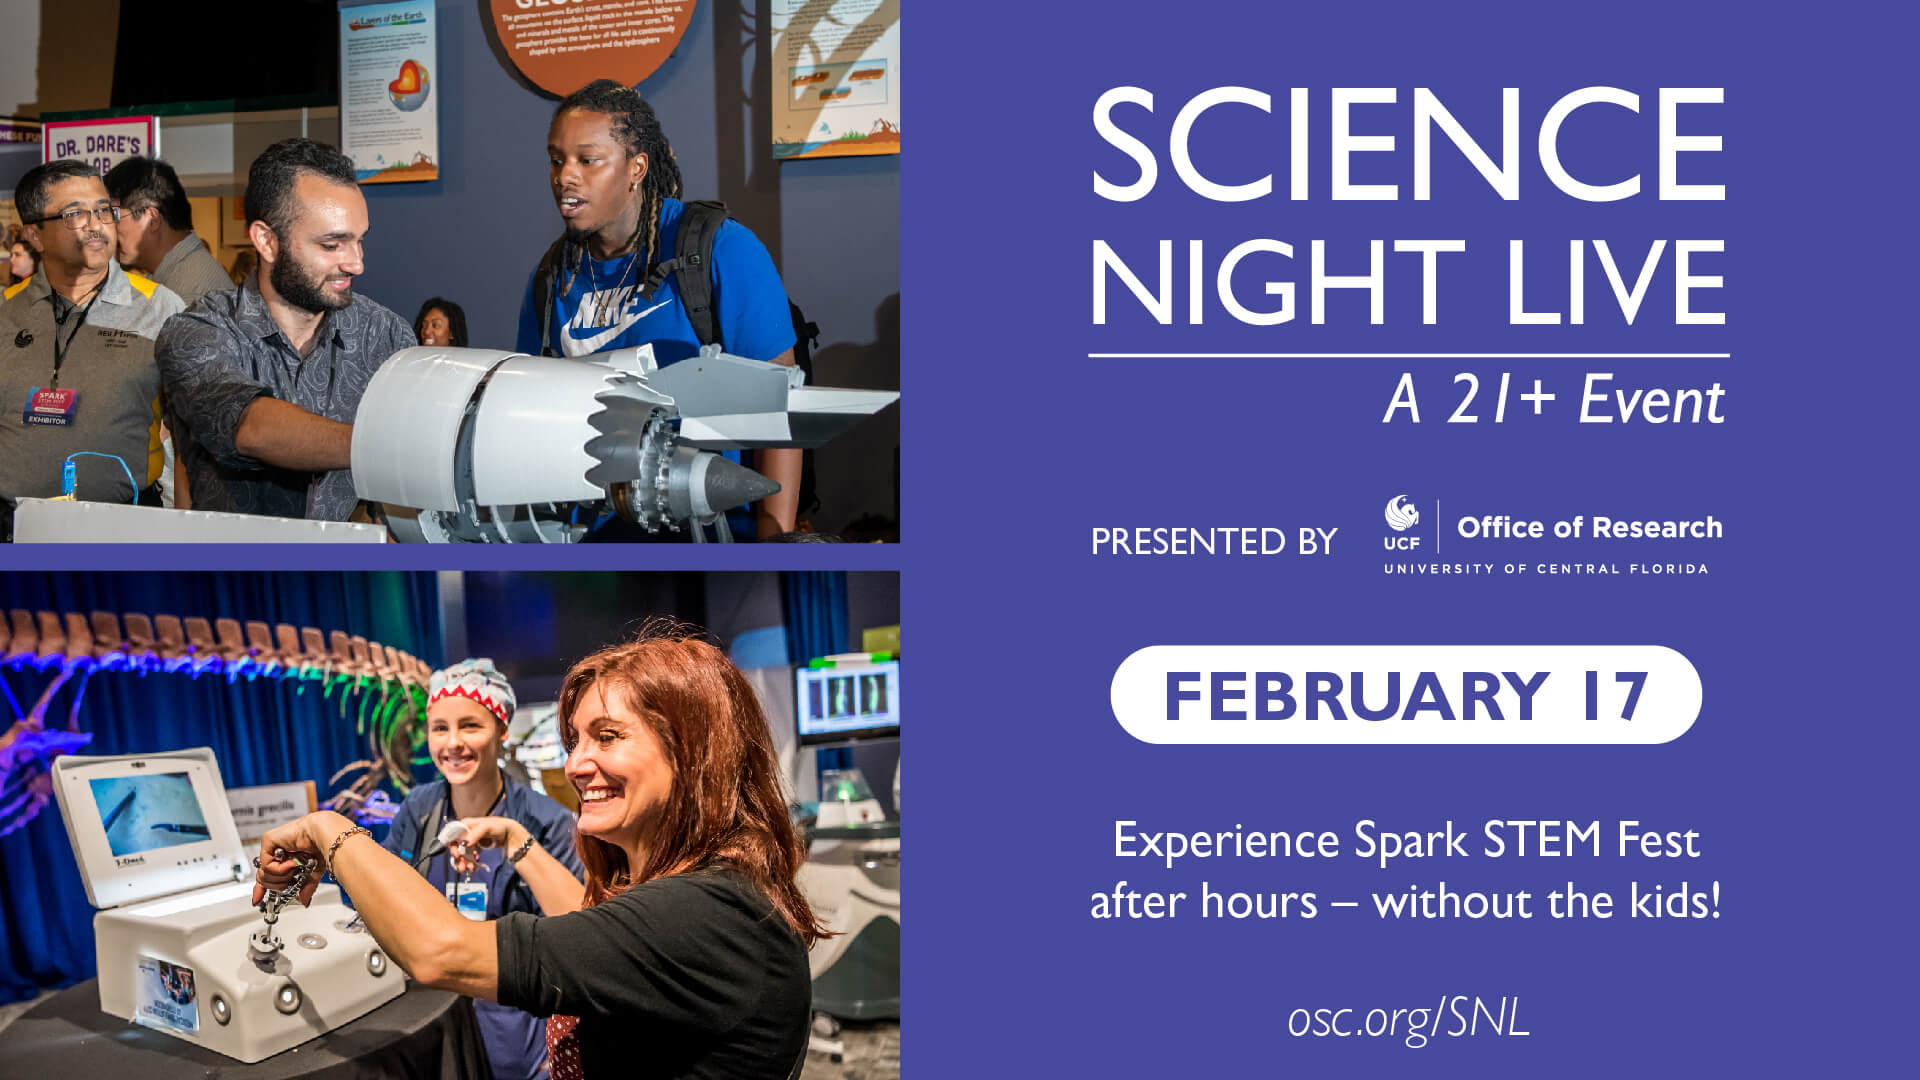 Science Night Live - A 21+ Event, Presented by UCF Office of Research, February 17. Experience Spark STEM Fest after hours without the kids!